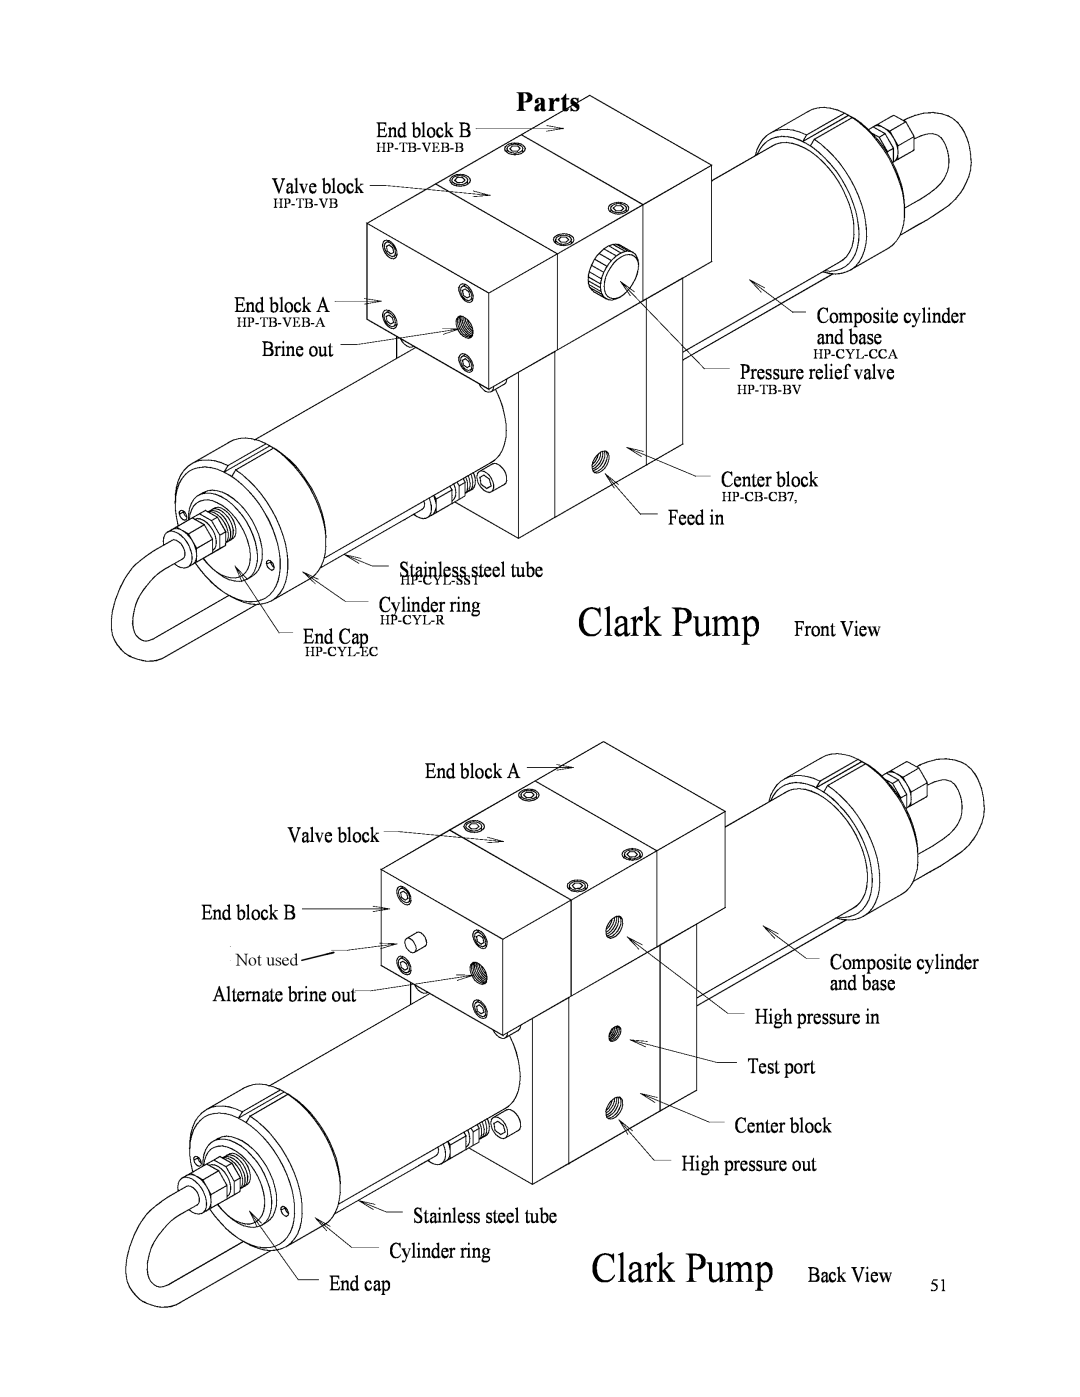 Spectra Watermakers MPC-5000 owner manual Clark Pump Front View, Clark Pump Back View 